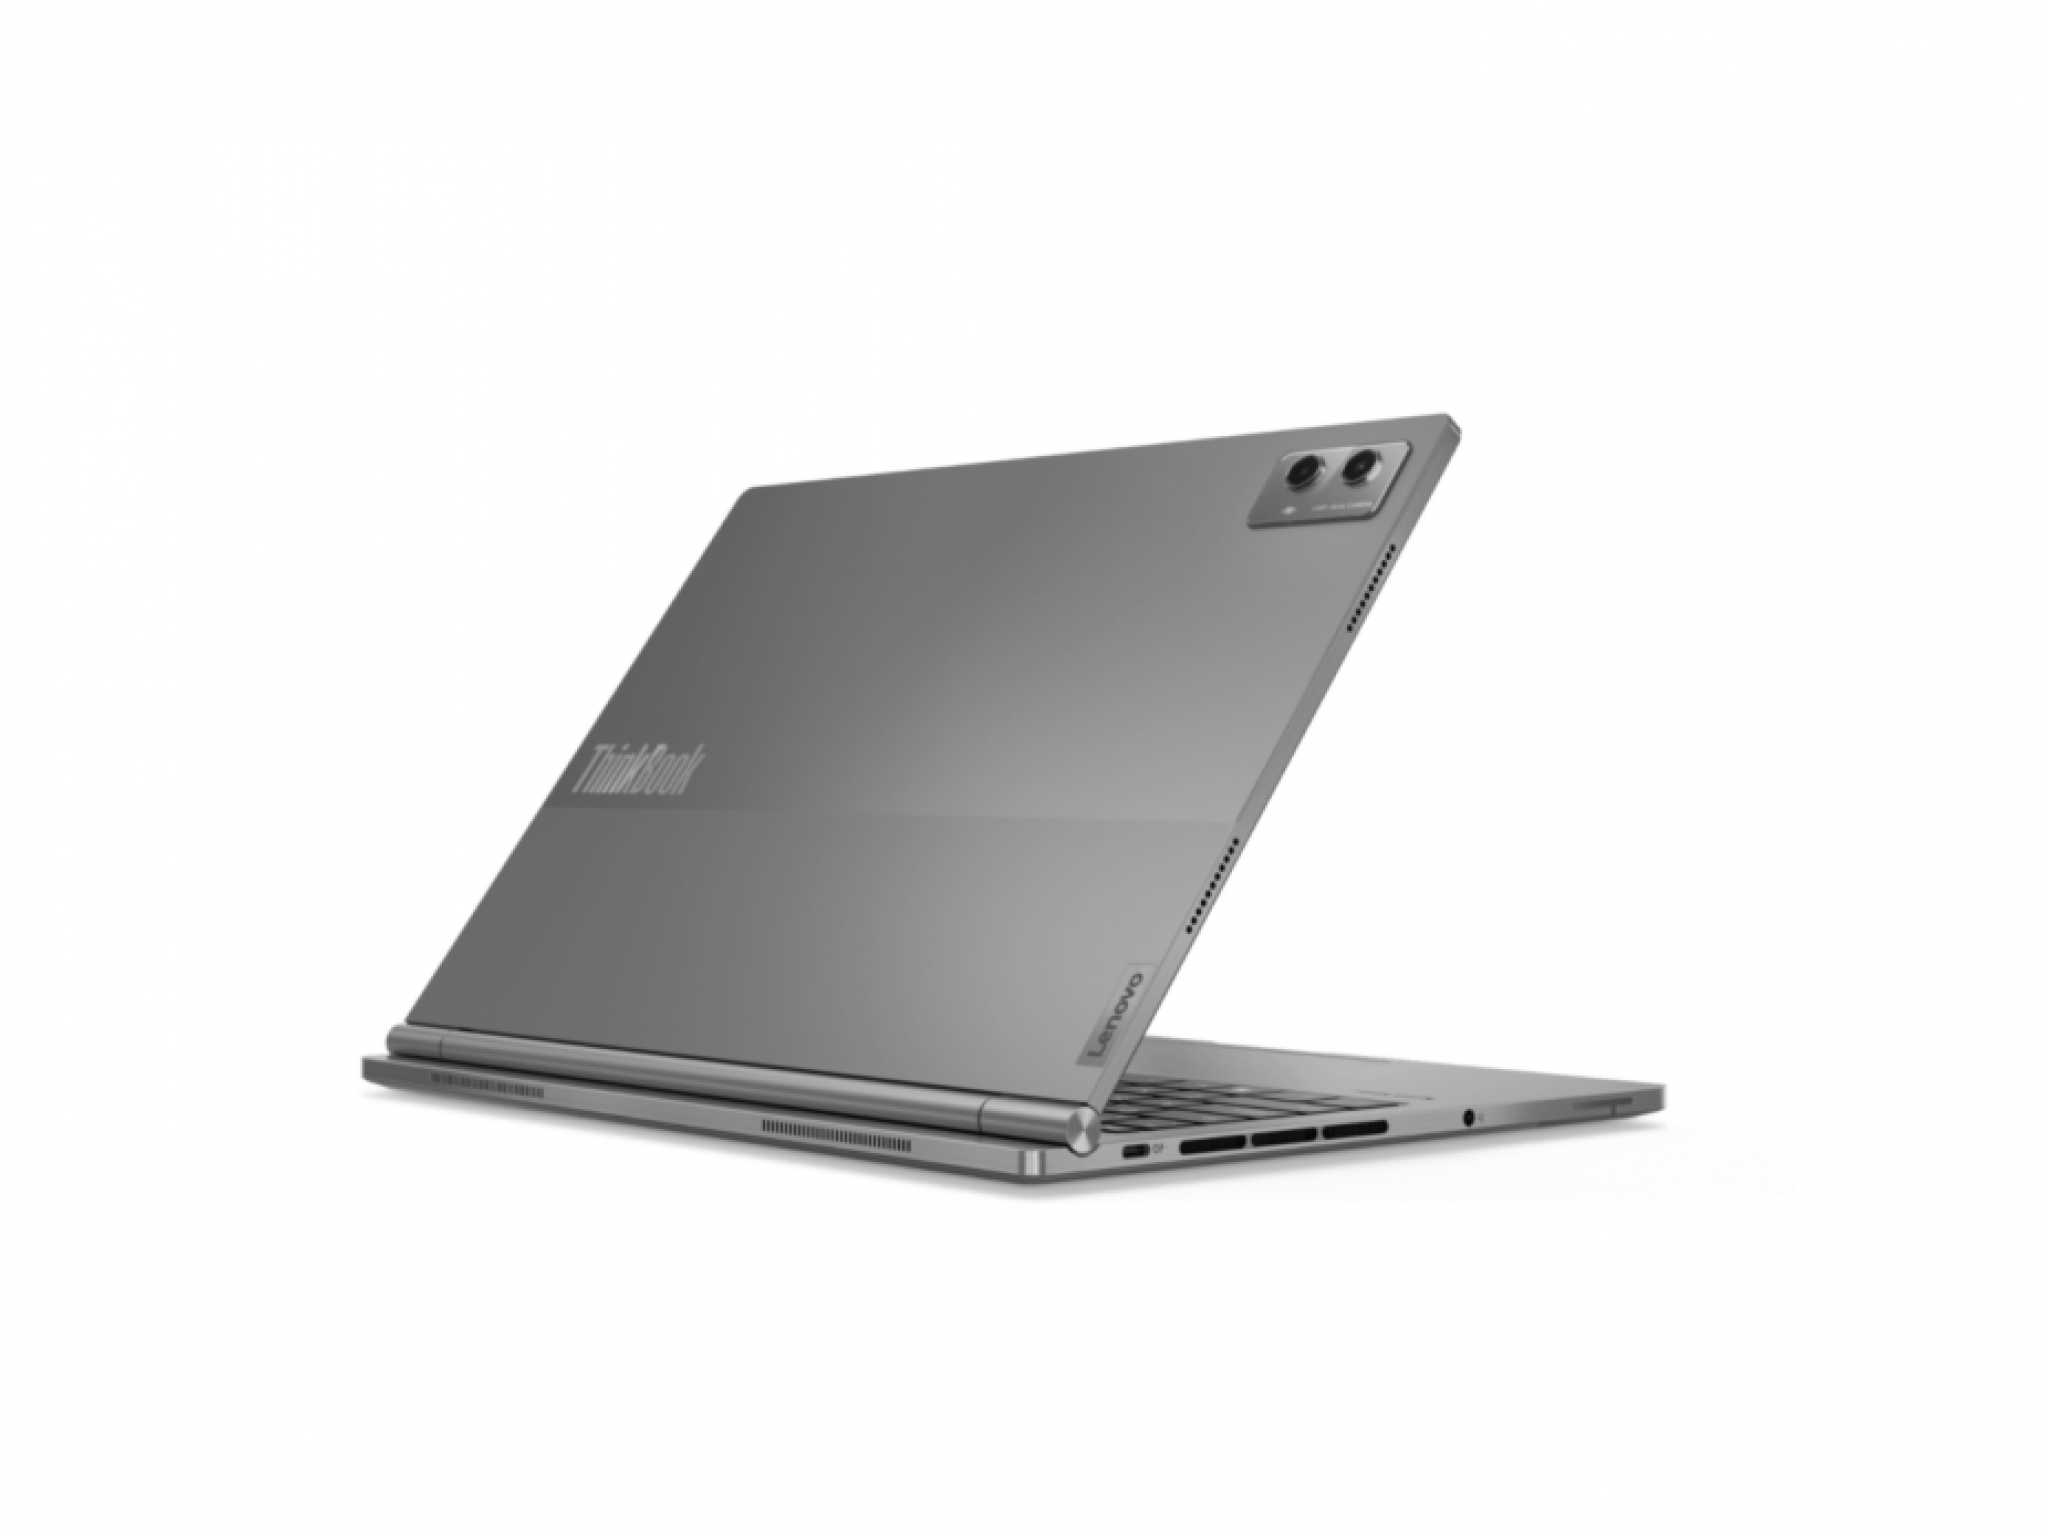  work-and-play-seamlessly-with-windows-and-android-on-this-new-lenovo-laptop 